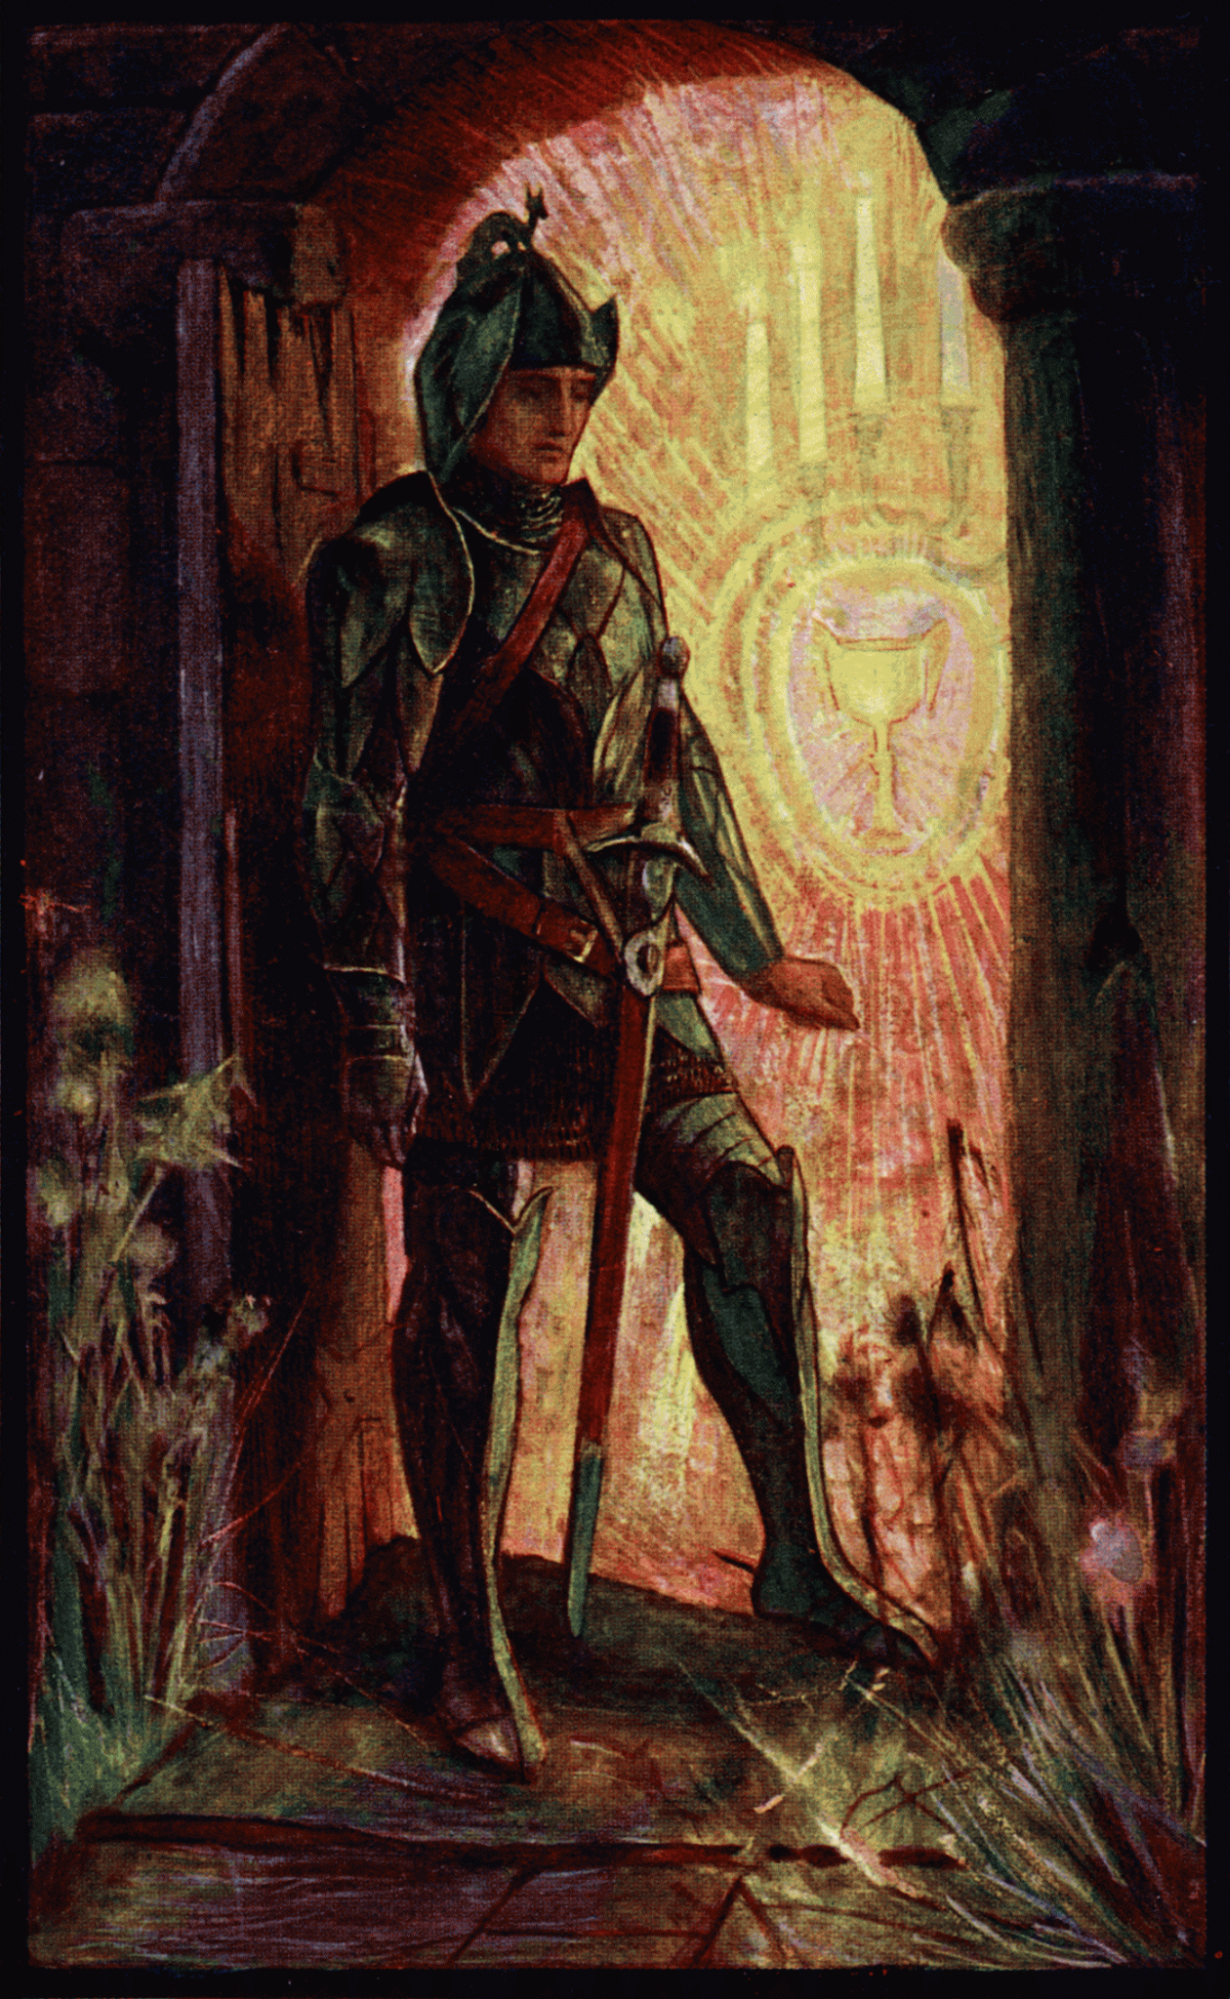 Illustration of a fully armored knight in a brightly lit doorway that features rays emanating from a a yellow goblet and candles